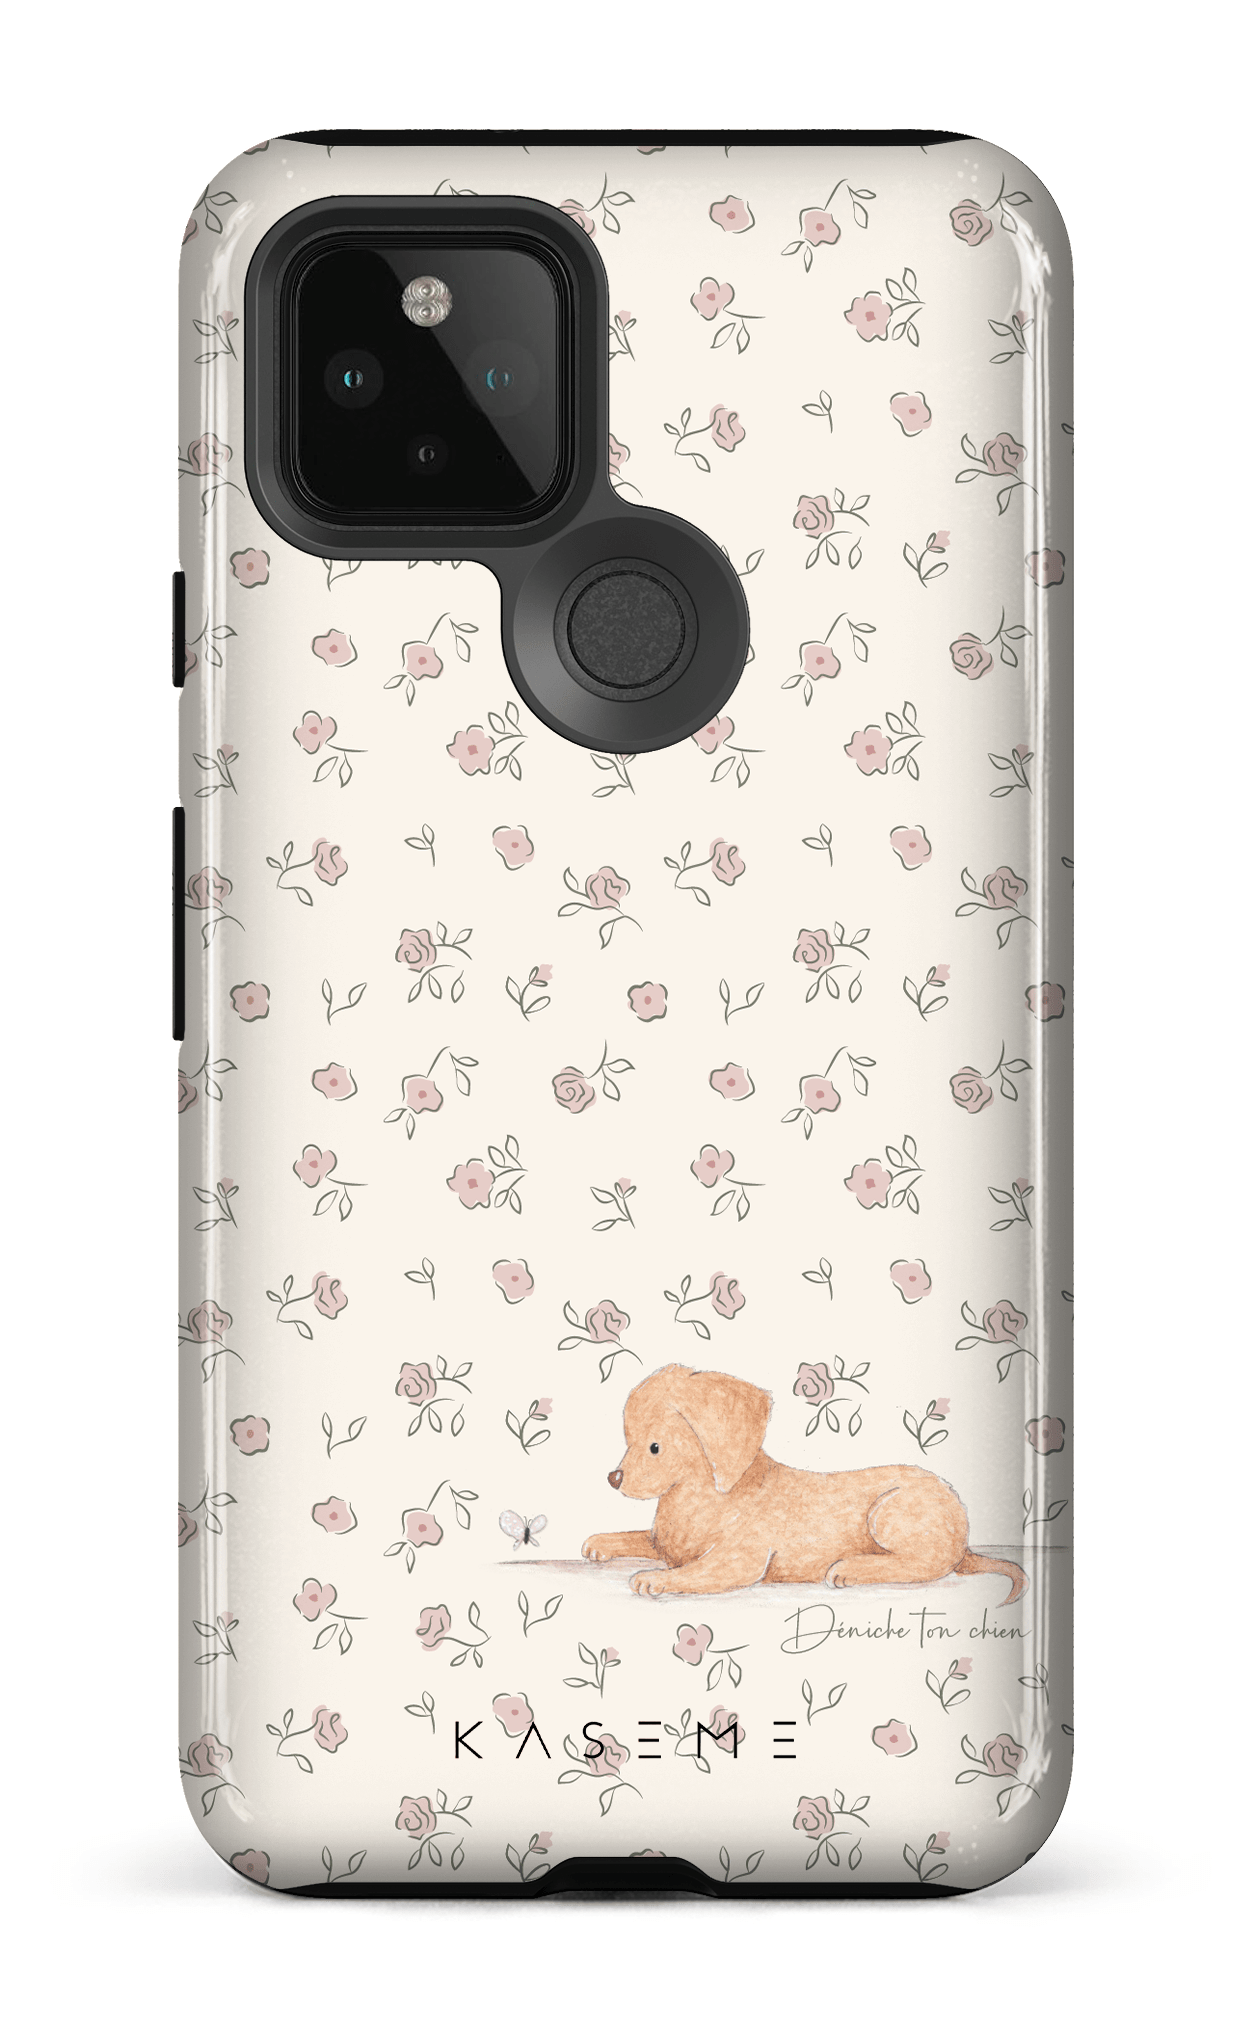 Fur-Ever A Dog Lover Pink by Déniche Ton Chien - Google Pixel 5